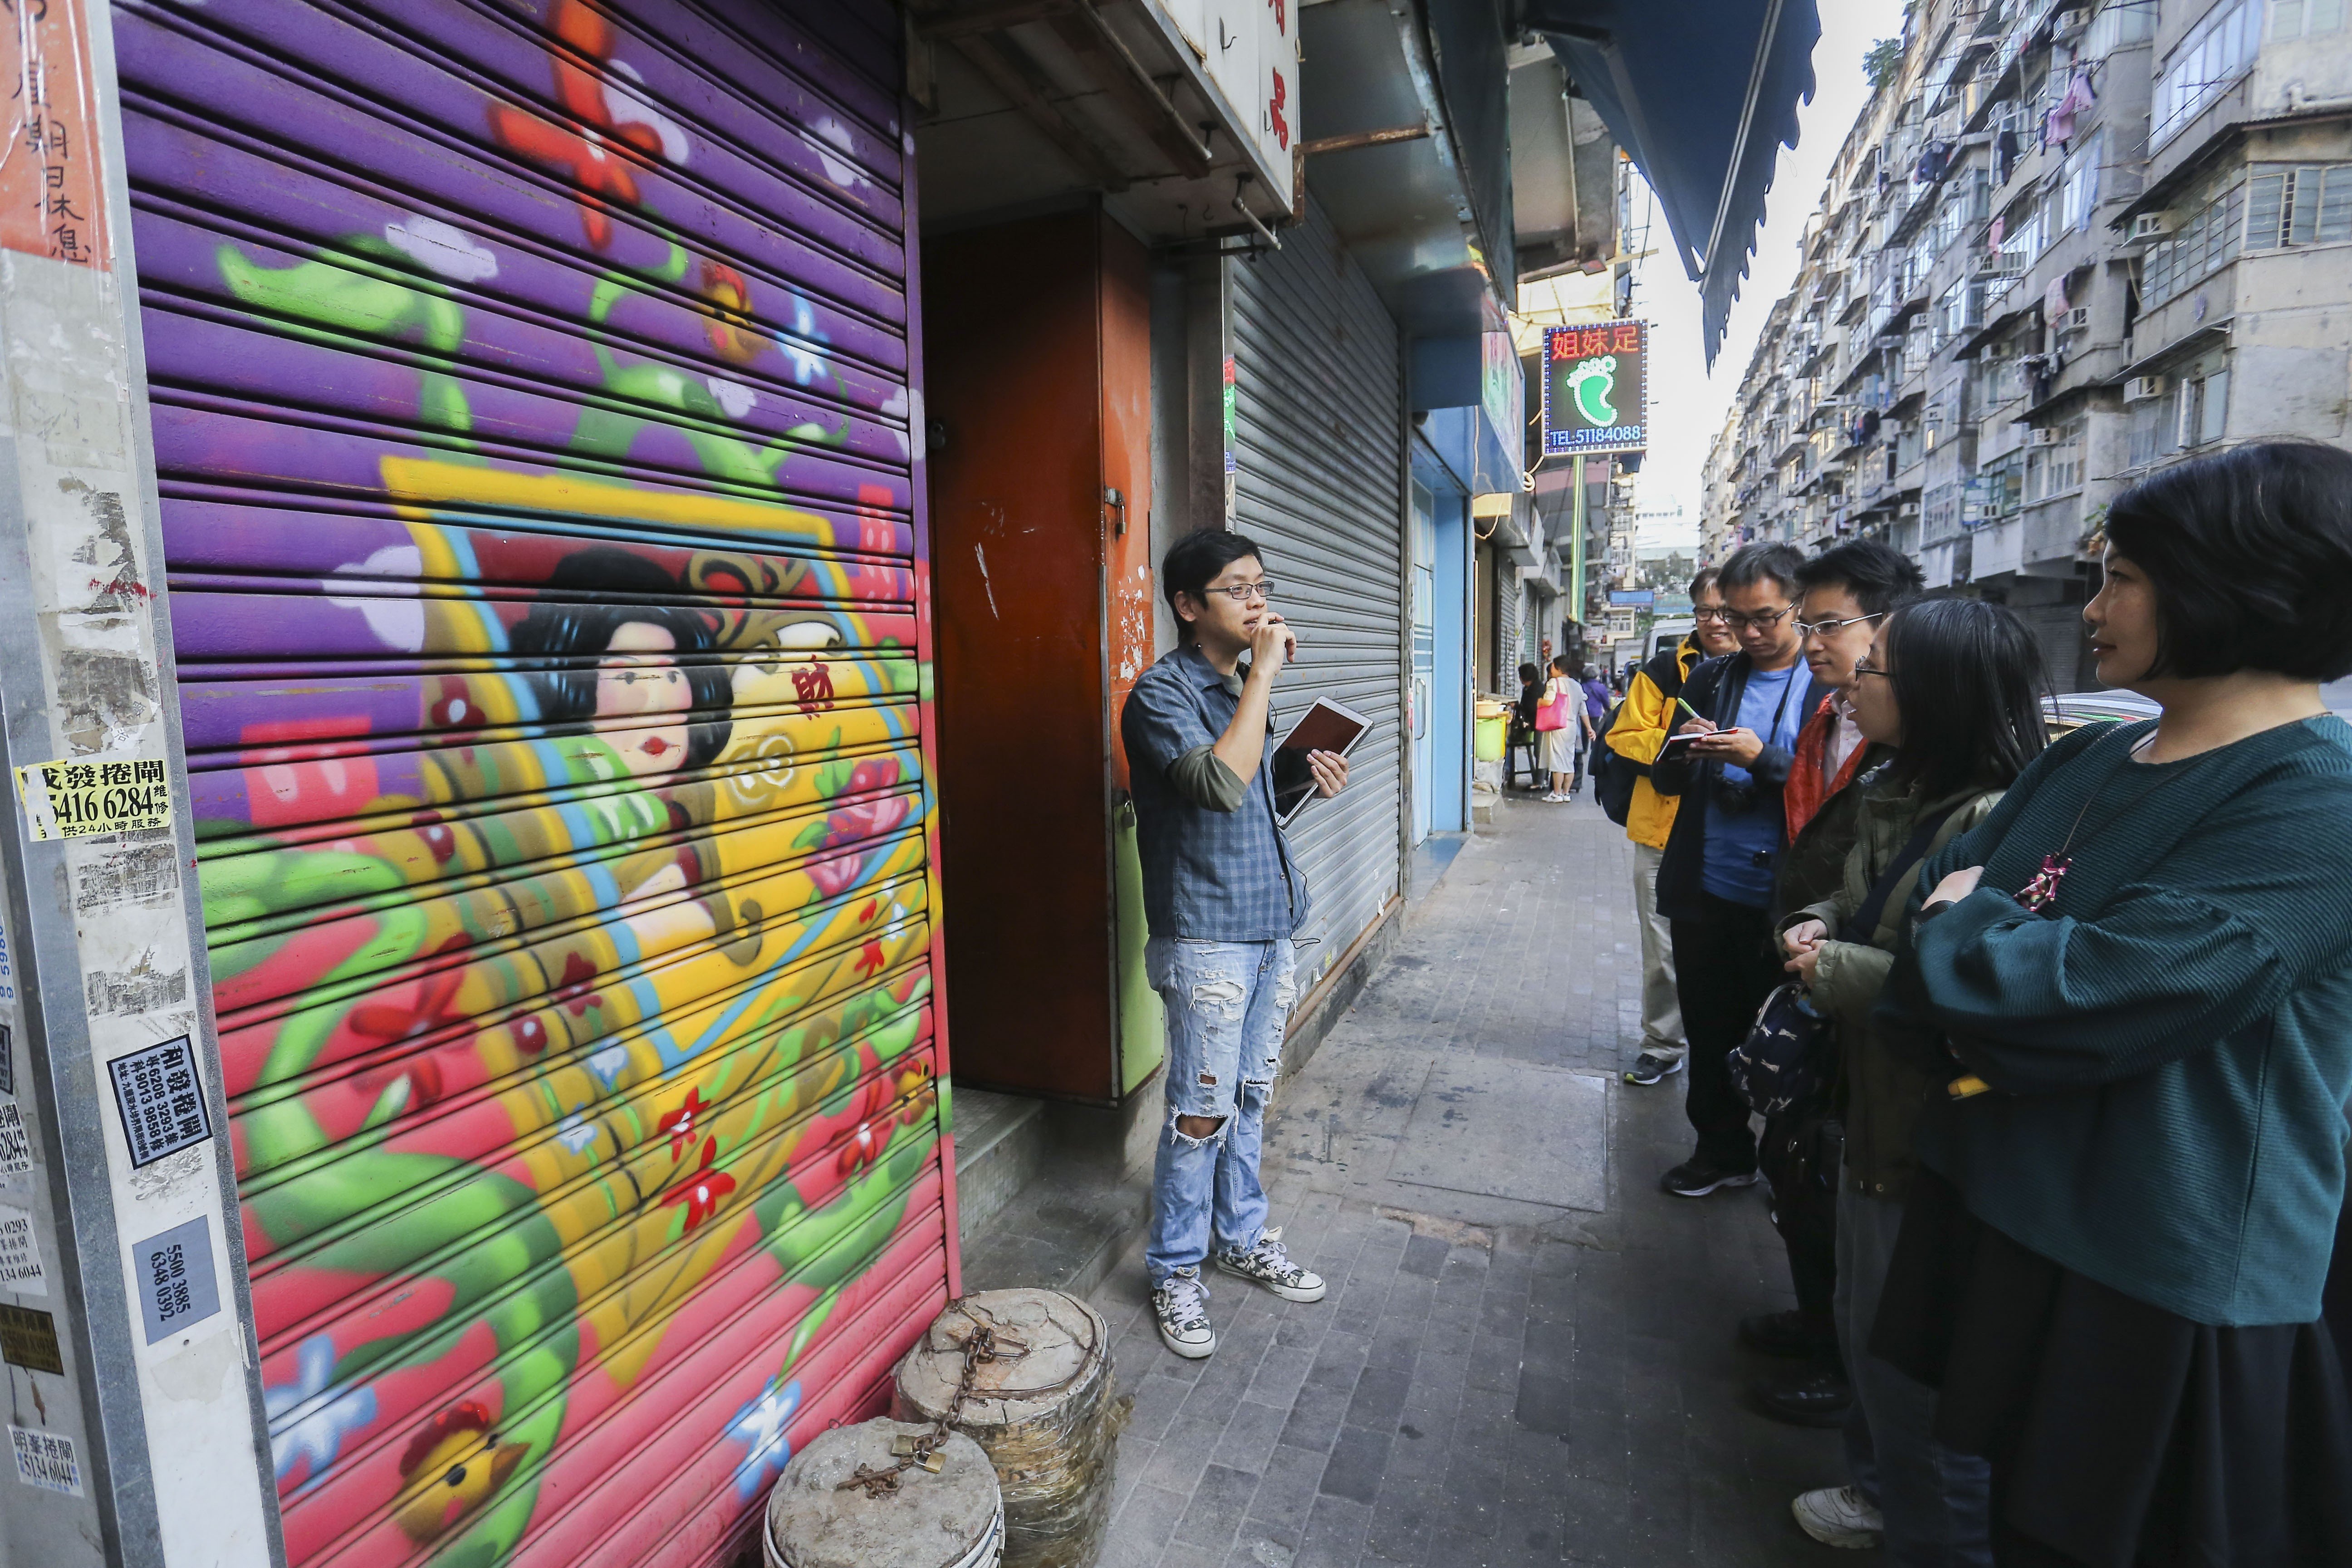 Stewart Cheng takes a small group out on his first art tour. Photo: Dickson Lee